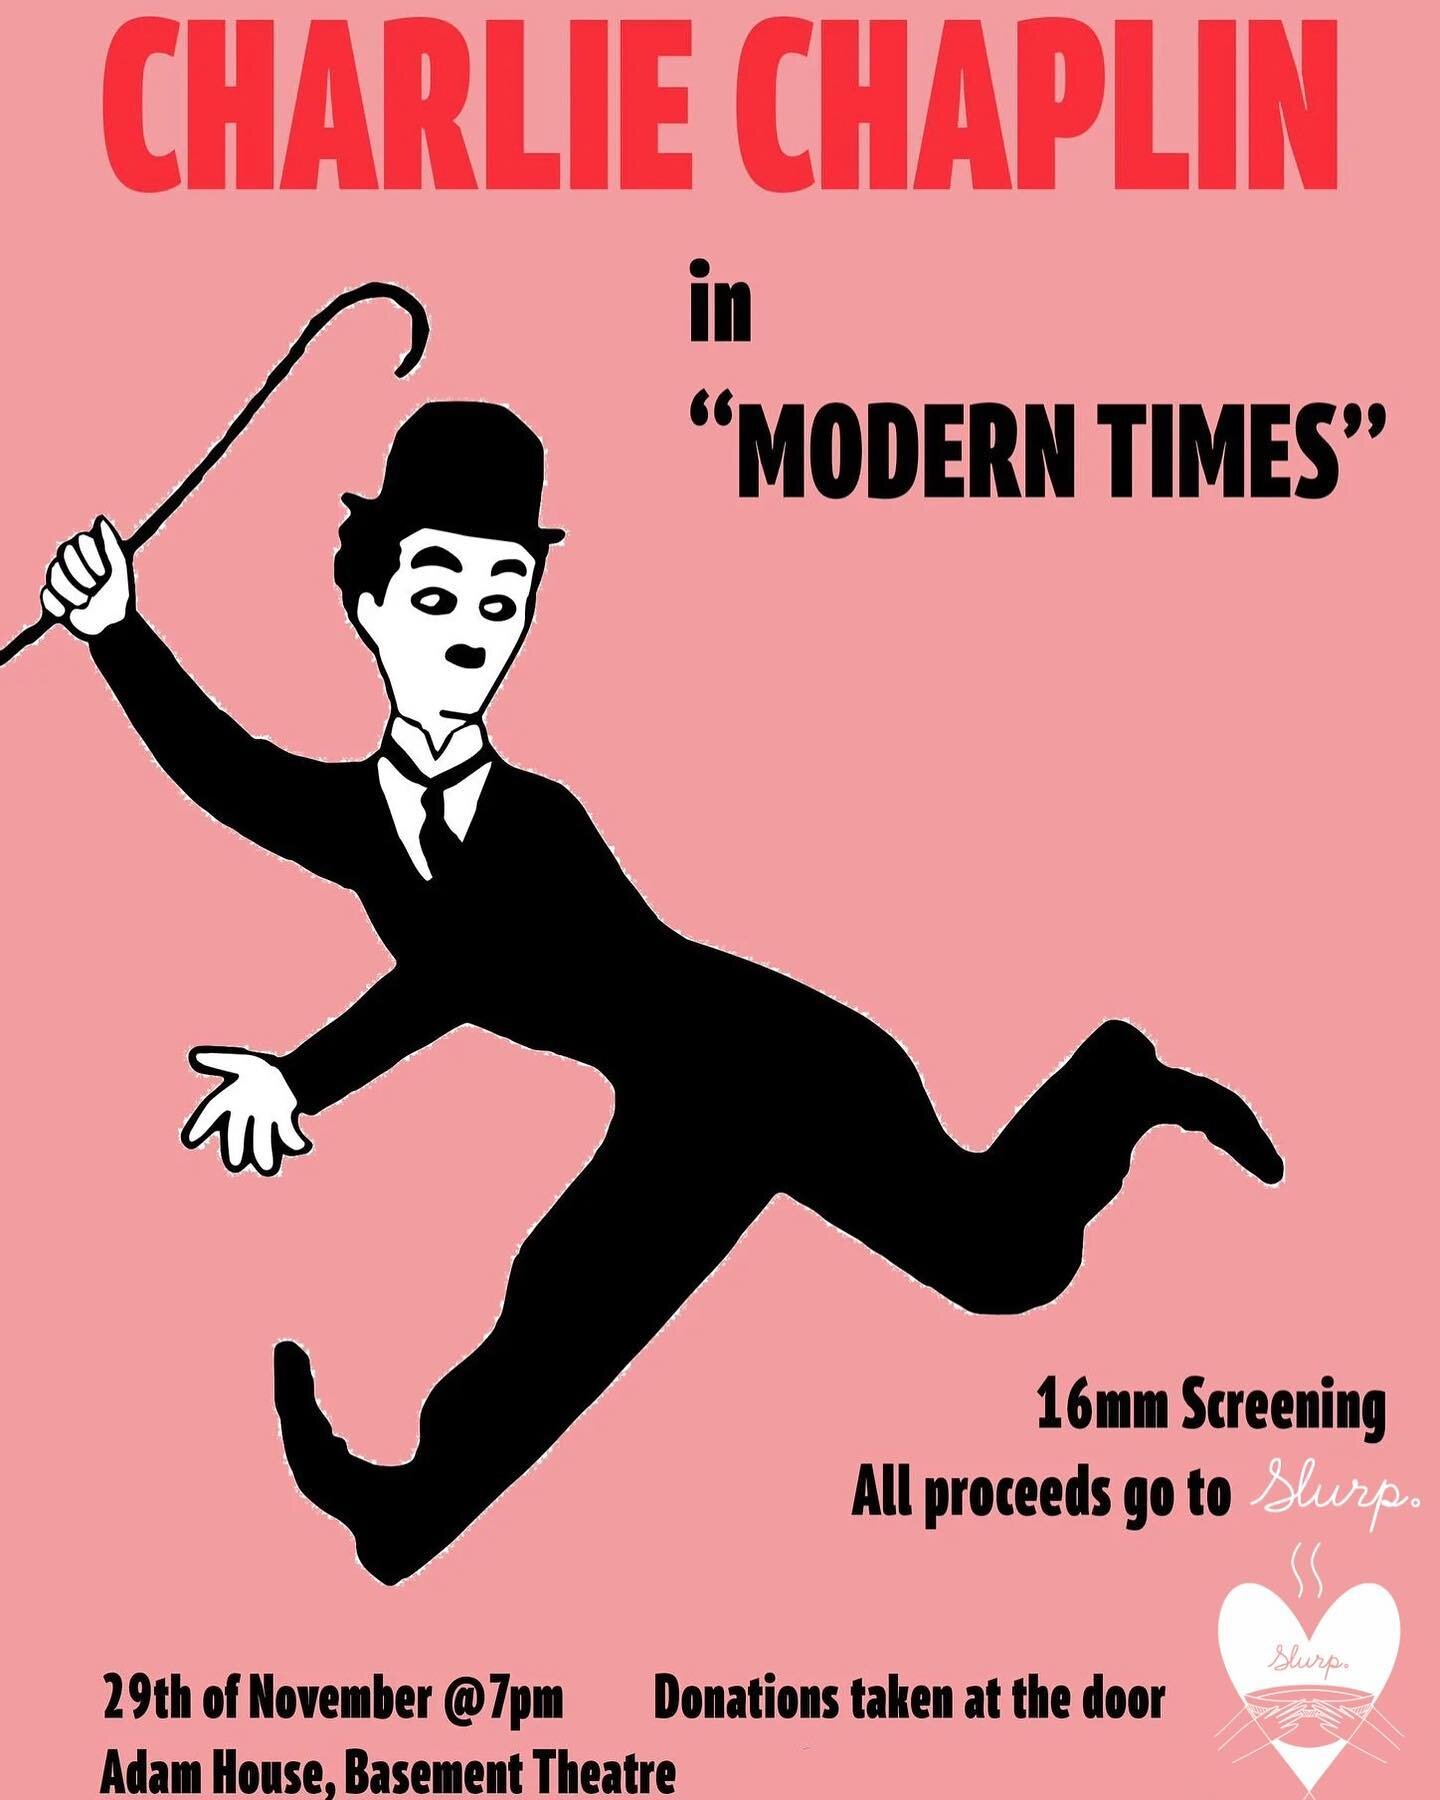 Slurp Film Screening!🍿🎬
Come along to our screening of &lsquo;Modern Times&rsquo; on 29th November at 7pm in Adam House, Basement Theatre. Entry is free and donations are very welcome, with all proceeds going towards Slurp! Costumes are also welcom